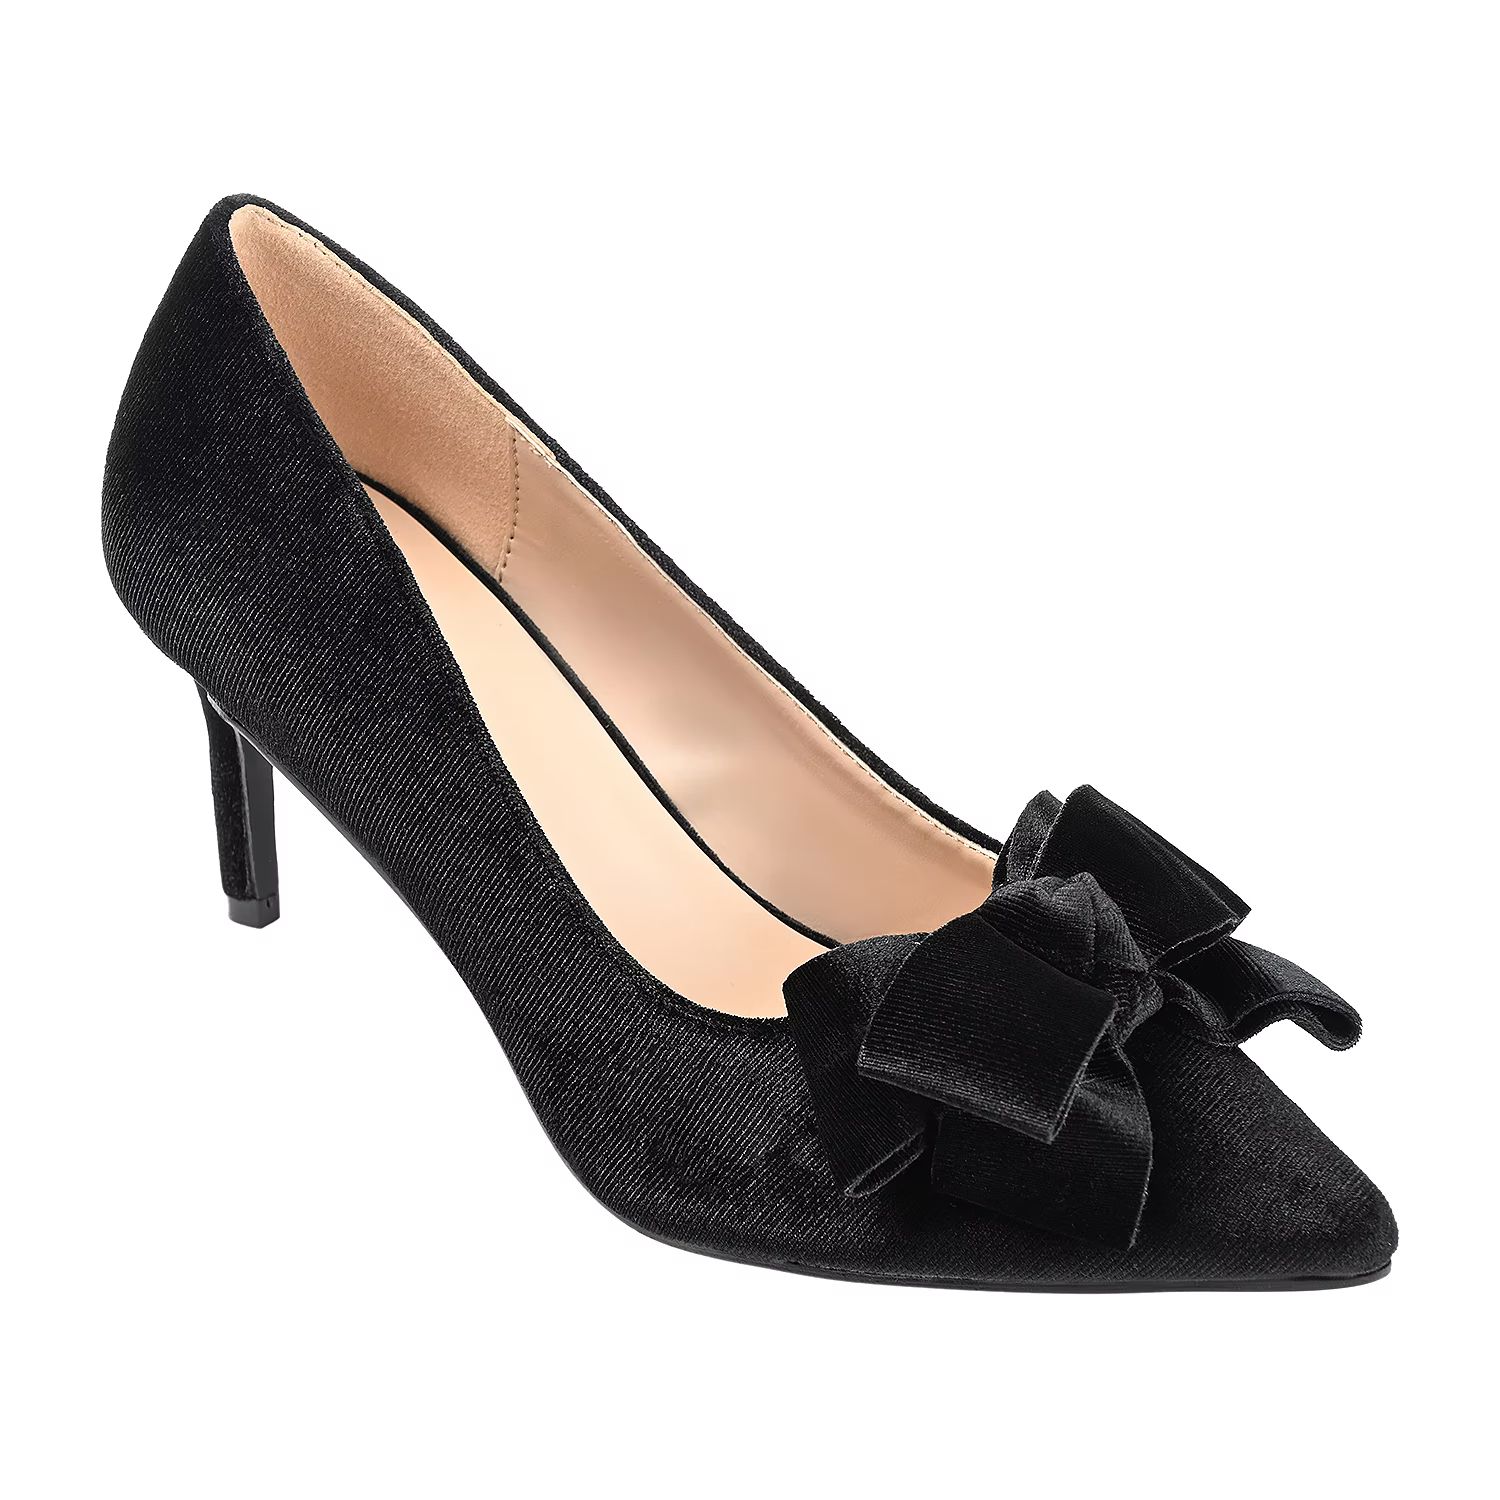 Journee Collection Womens Crystol Pointed Toe Stiletto Heel Pumps | JCPenney